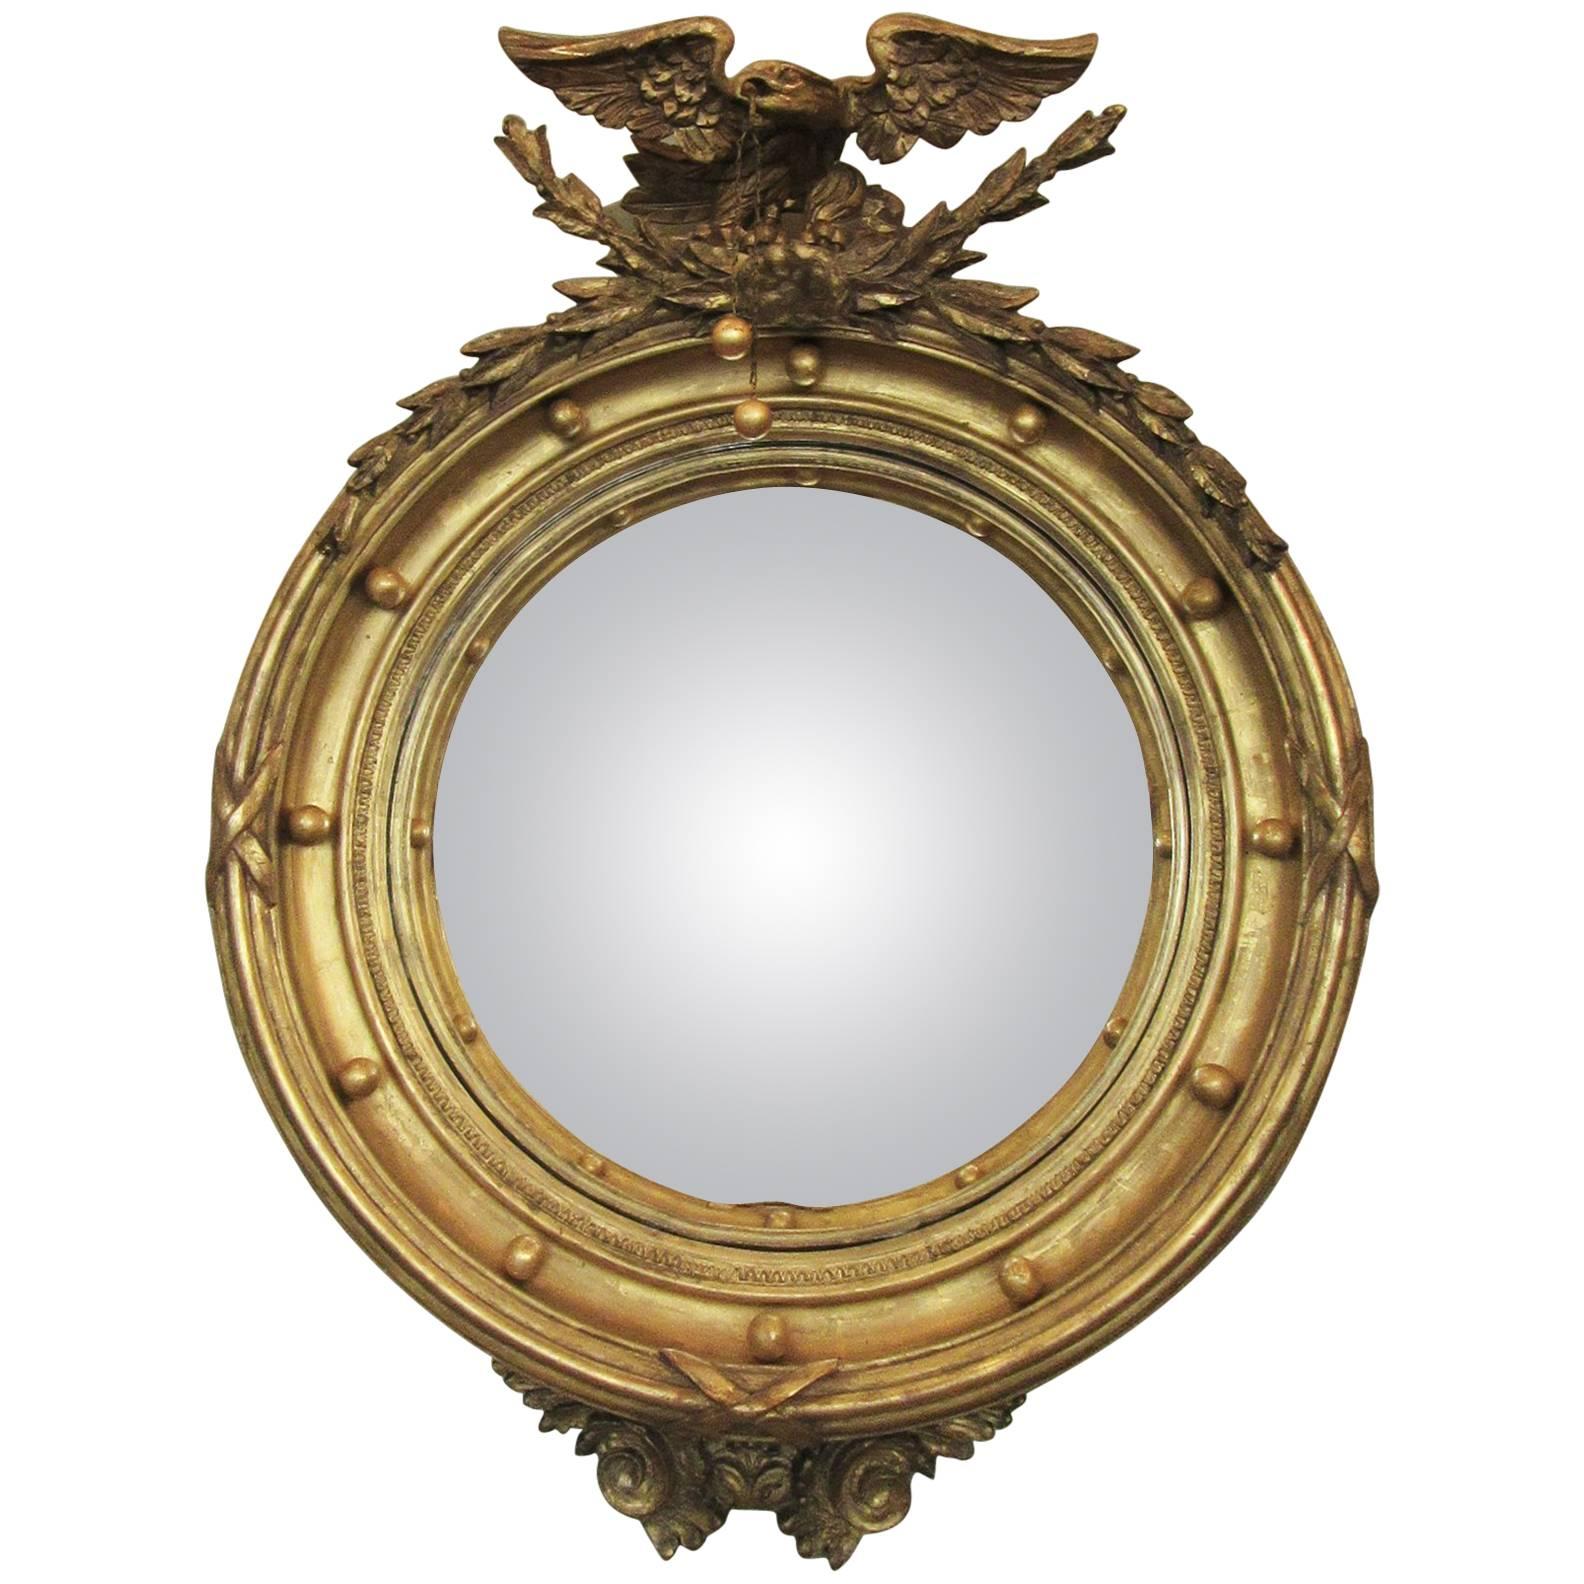 Early 19th Century English Regency Giltwood Convex Mirror with Eagle and Tassle